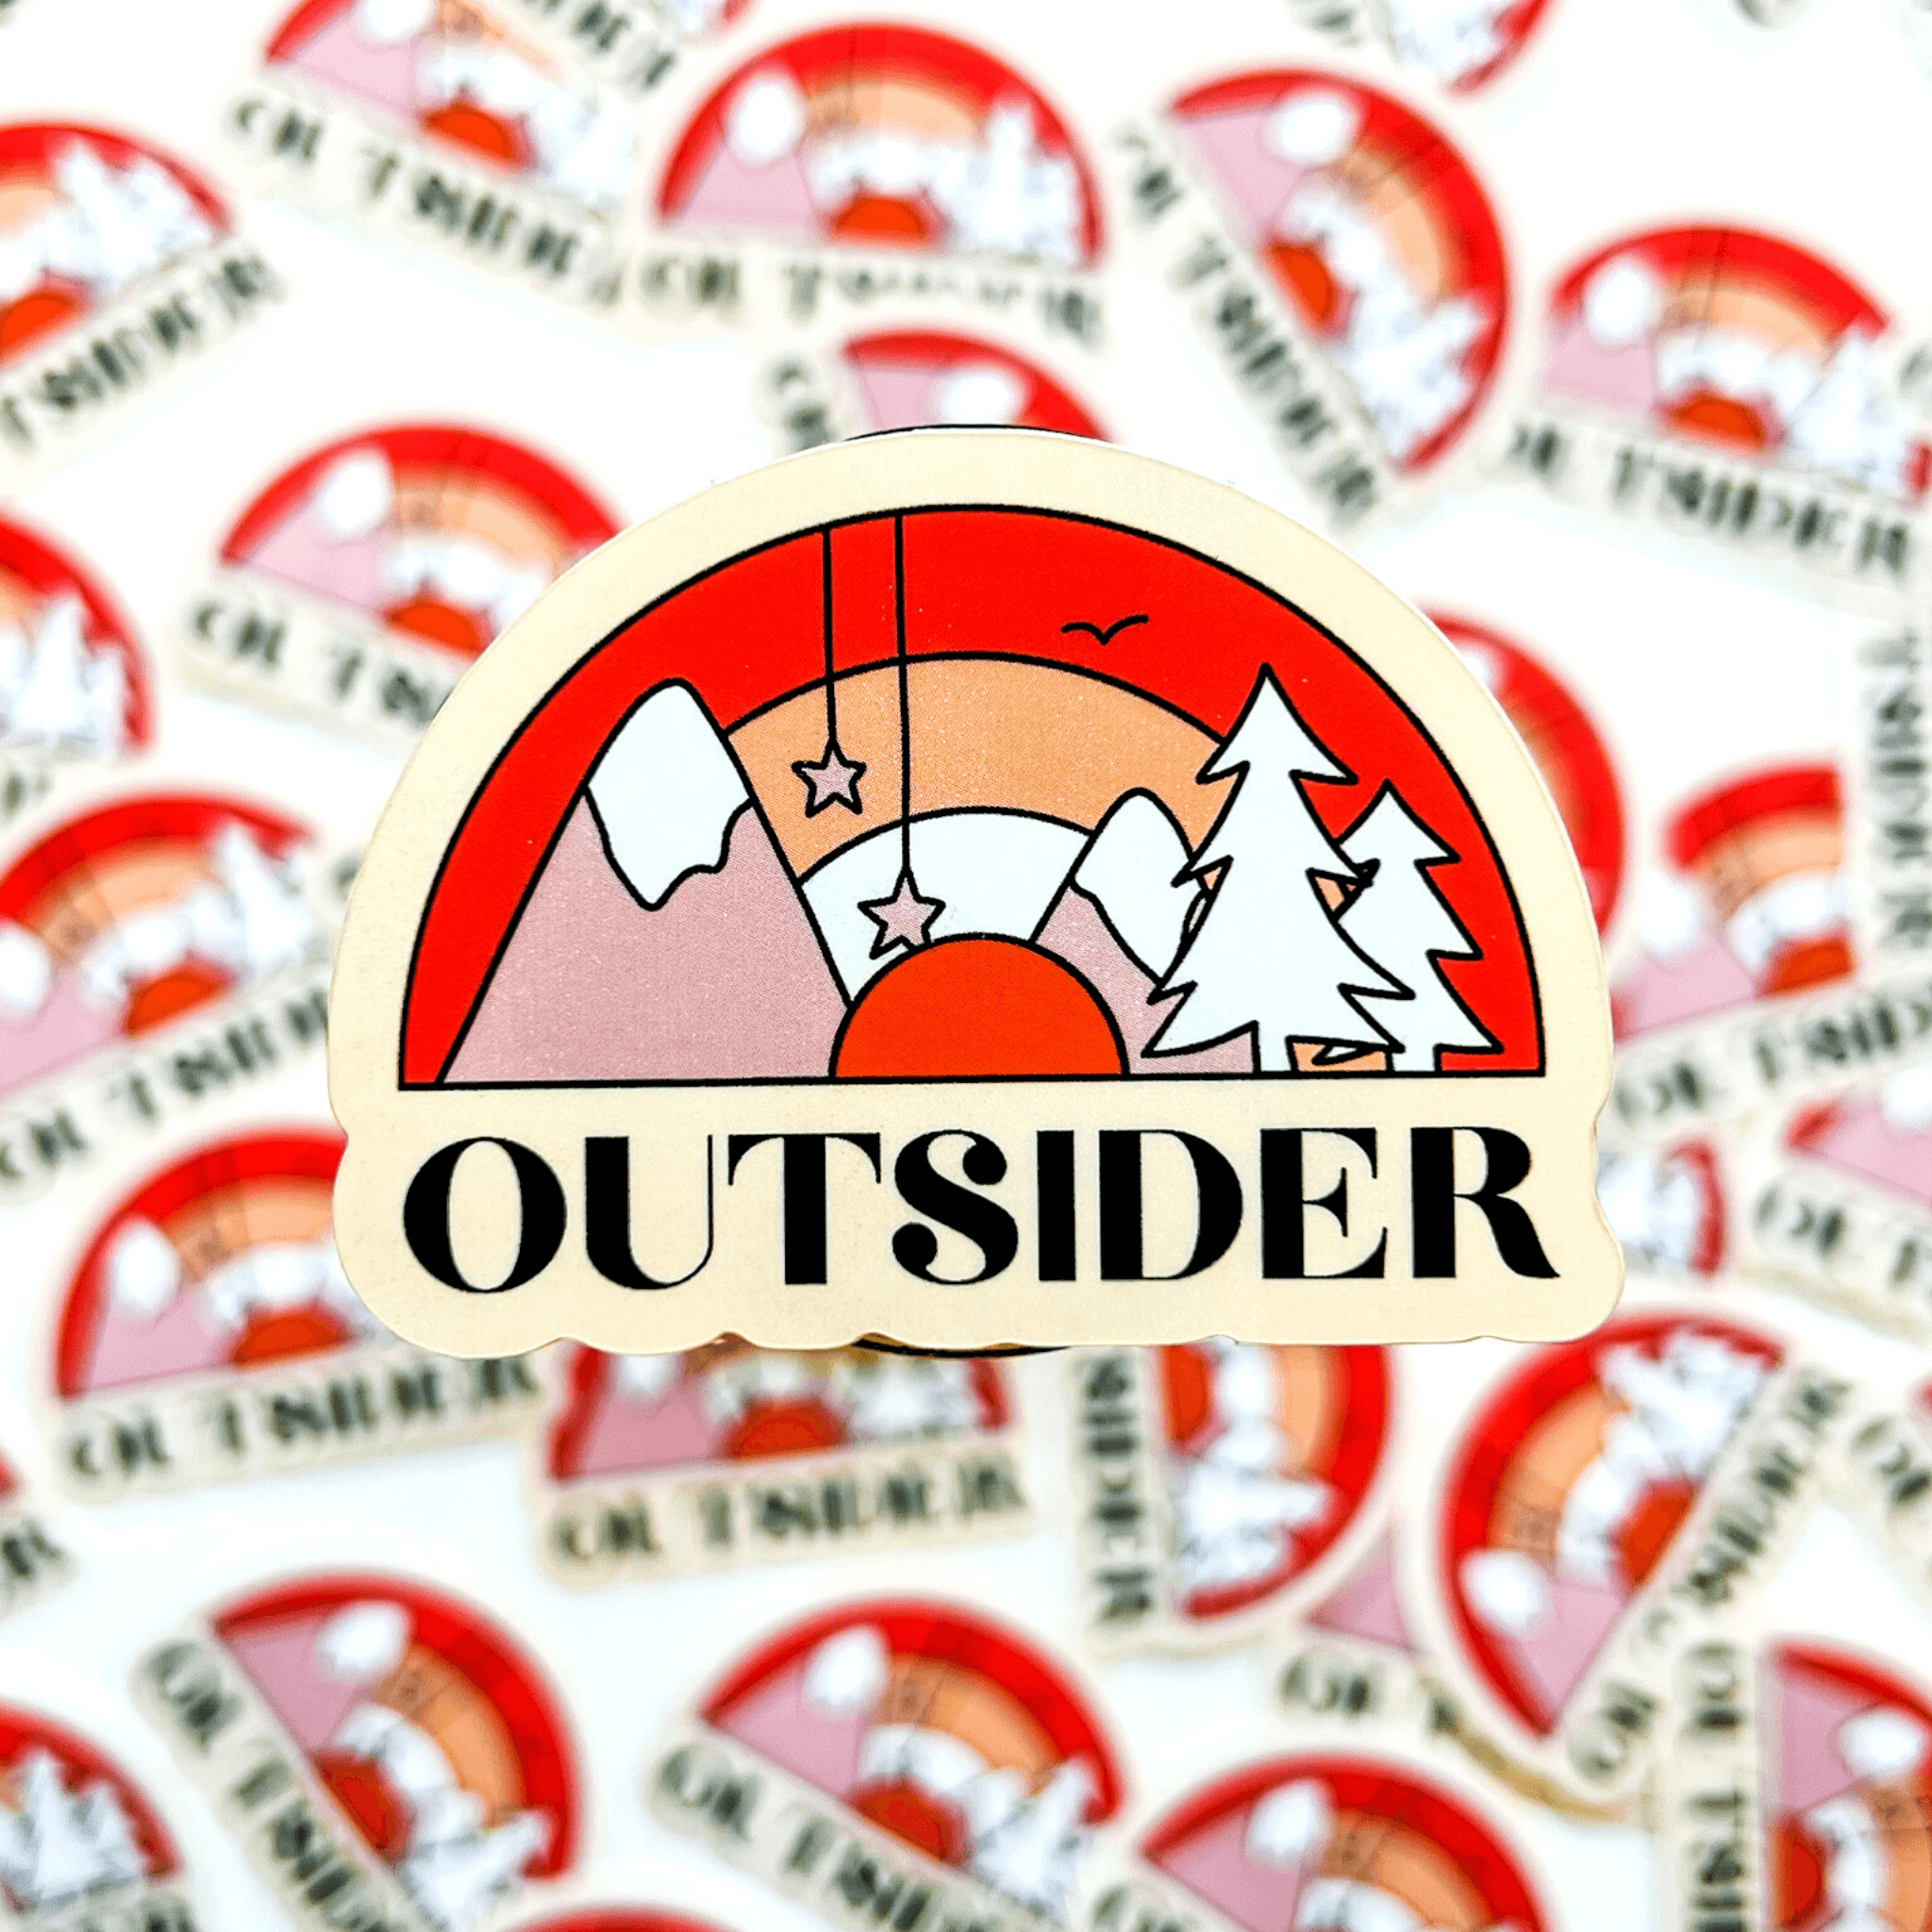 Outdoorsy nature inspired sticker